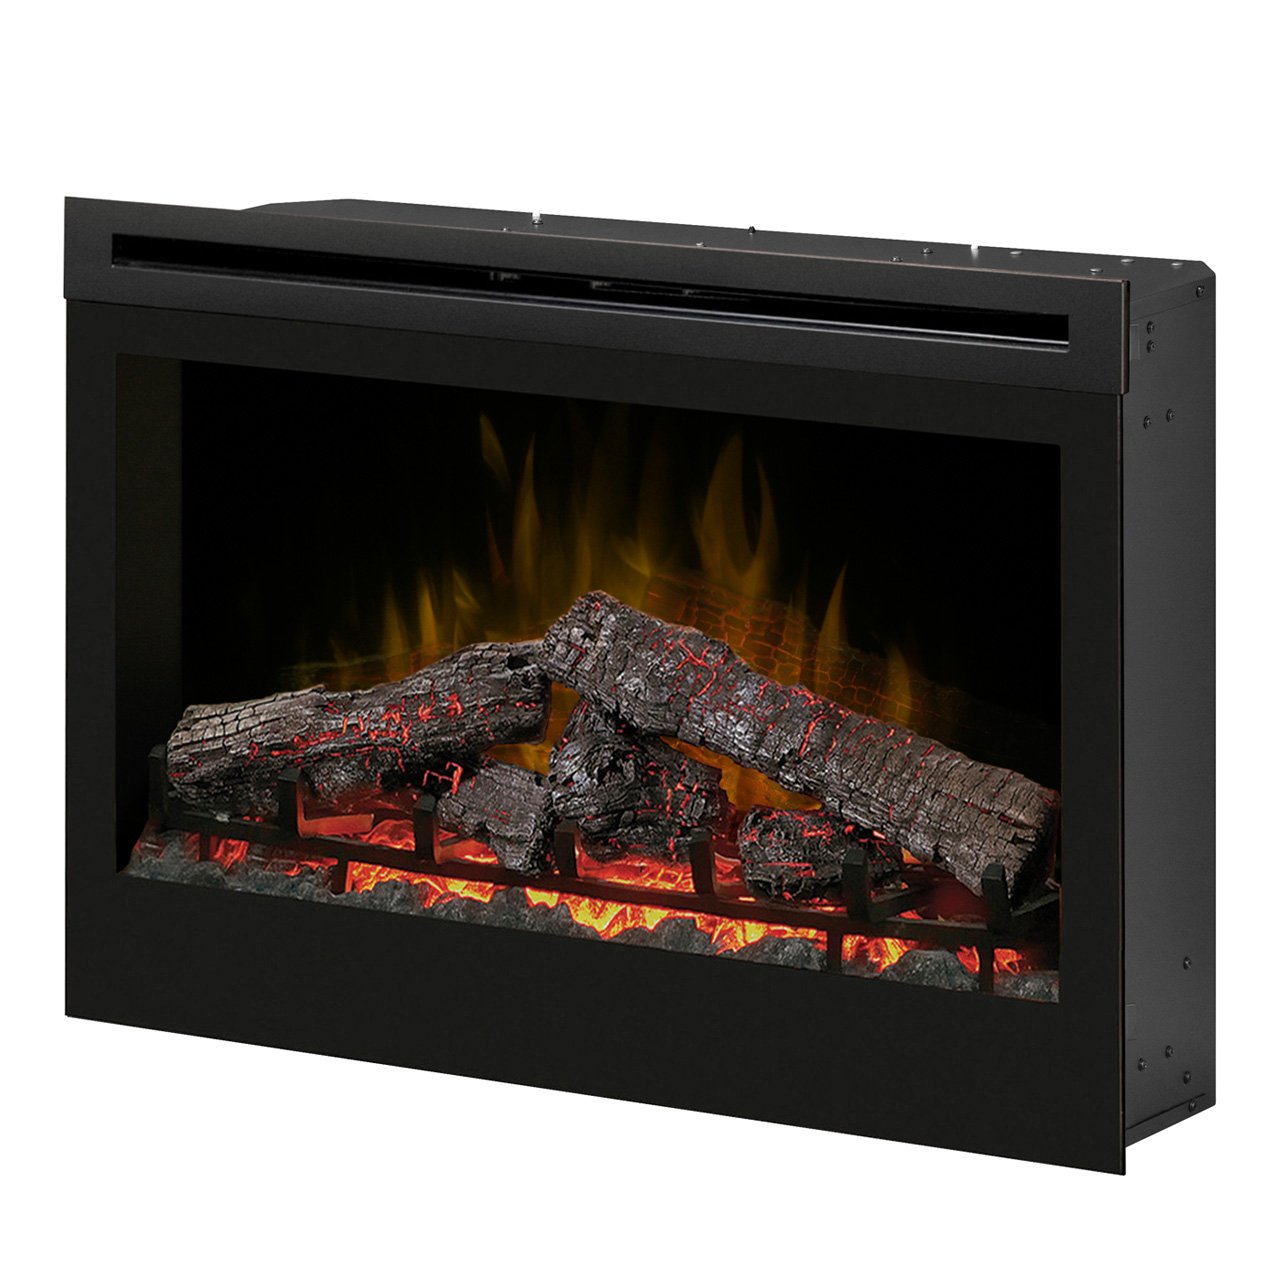 How to Add A Fireplace Best Of Dimplex Df3033st 33 Inch Self Trimming Electric Fireplace Insert